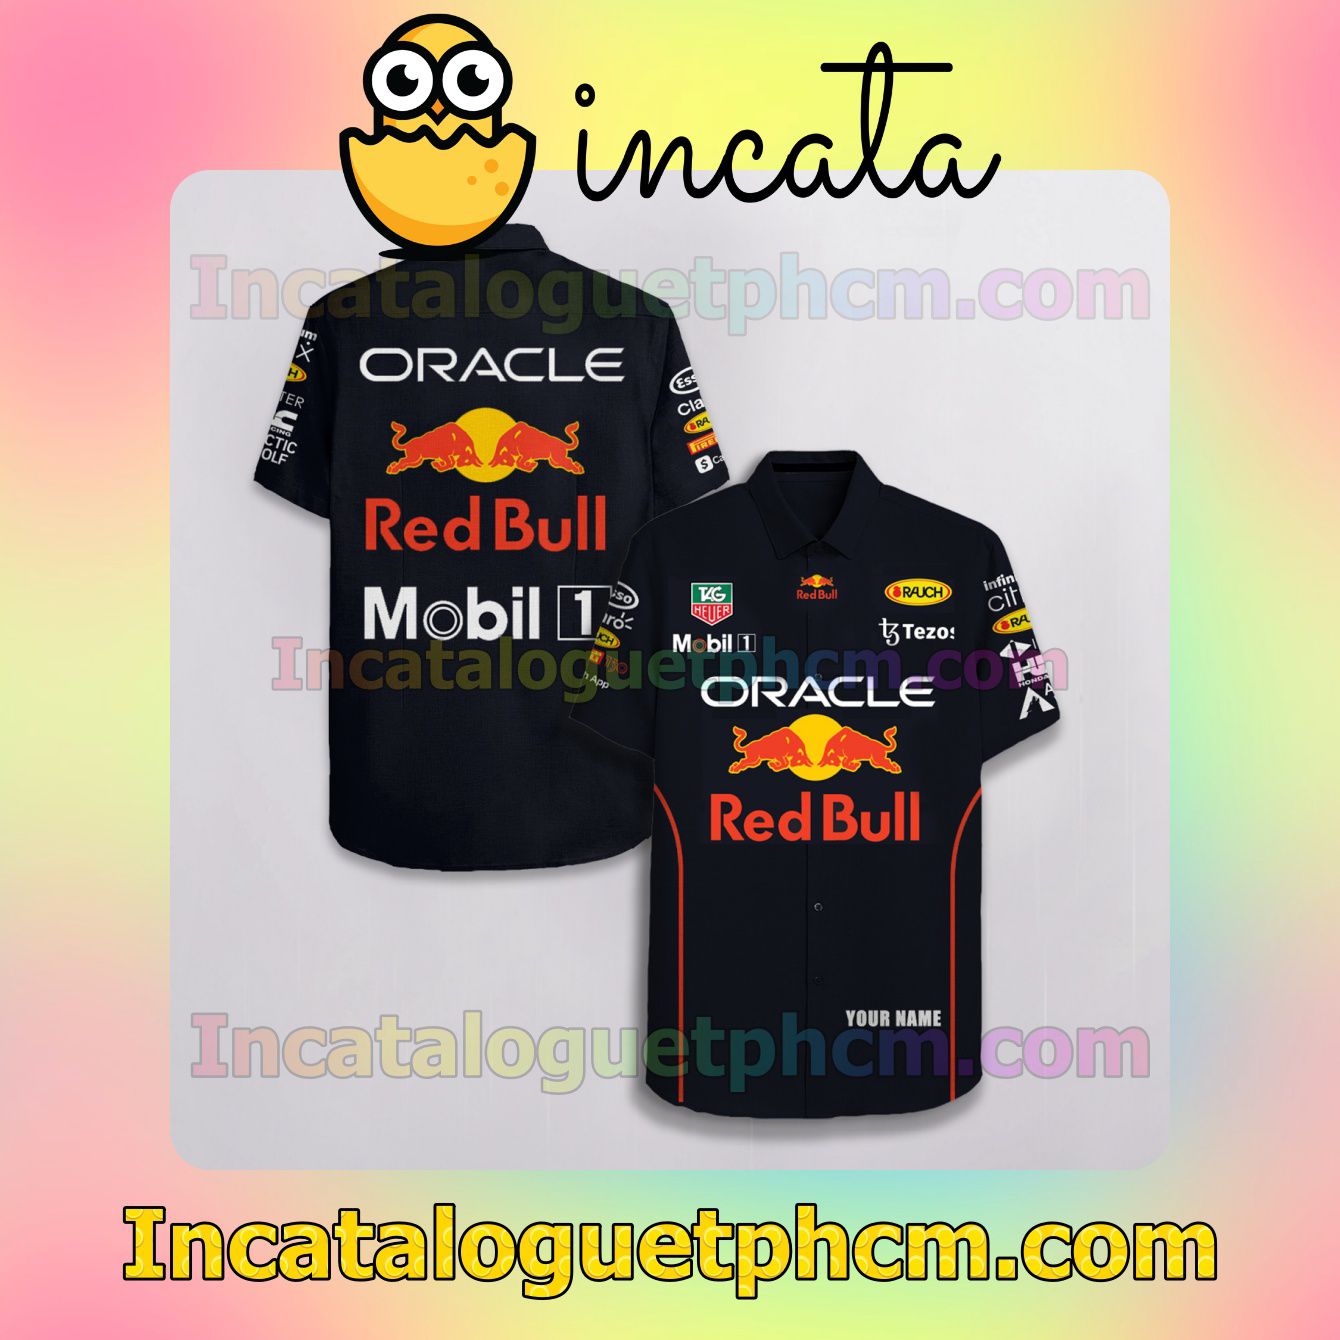 Personalized Oracle Red Bull F1 Racing Mobil 1 Tag Heuer Black Button Shirt And Swim Trunk